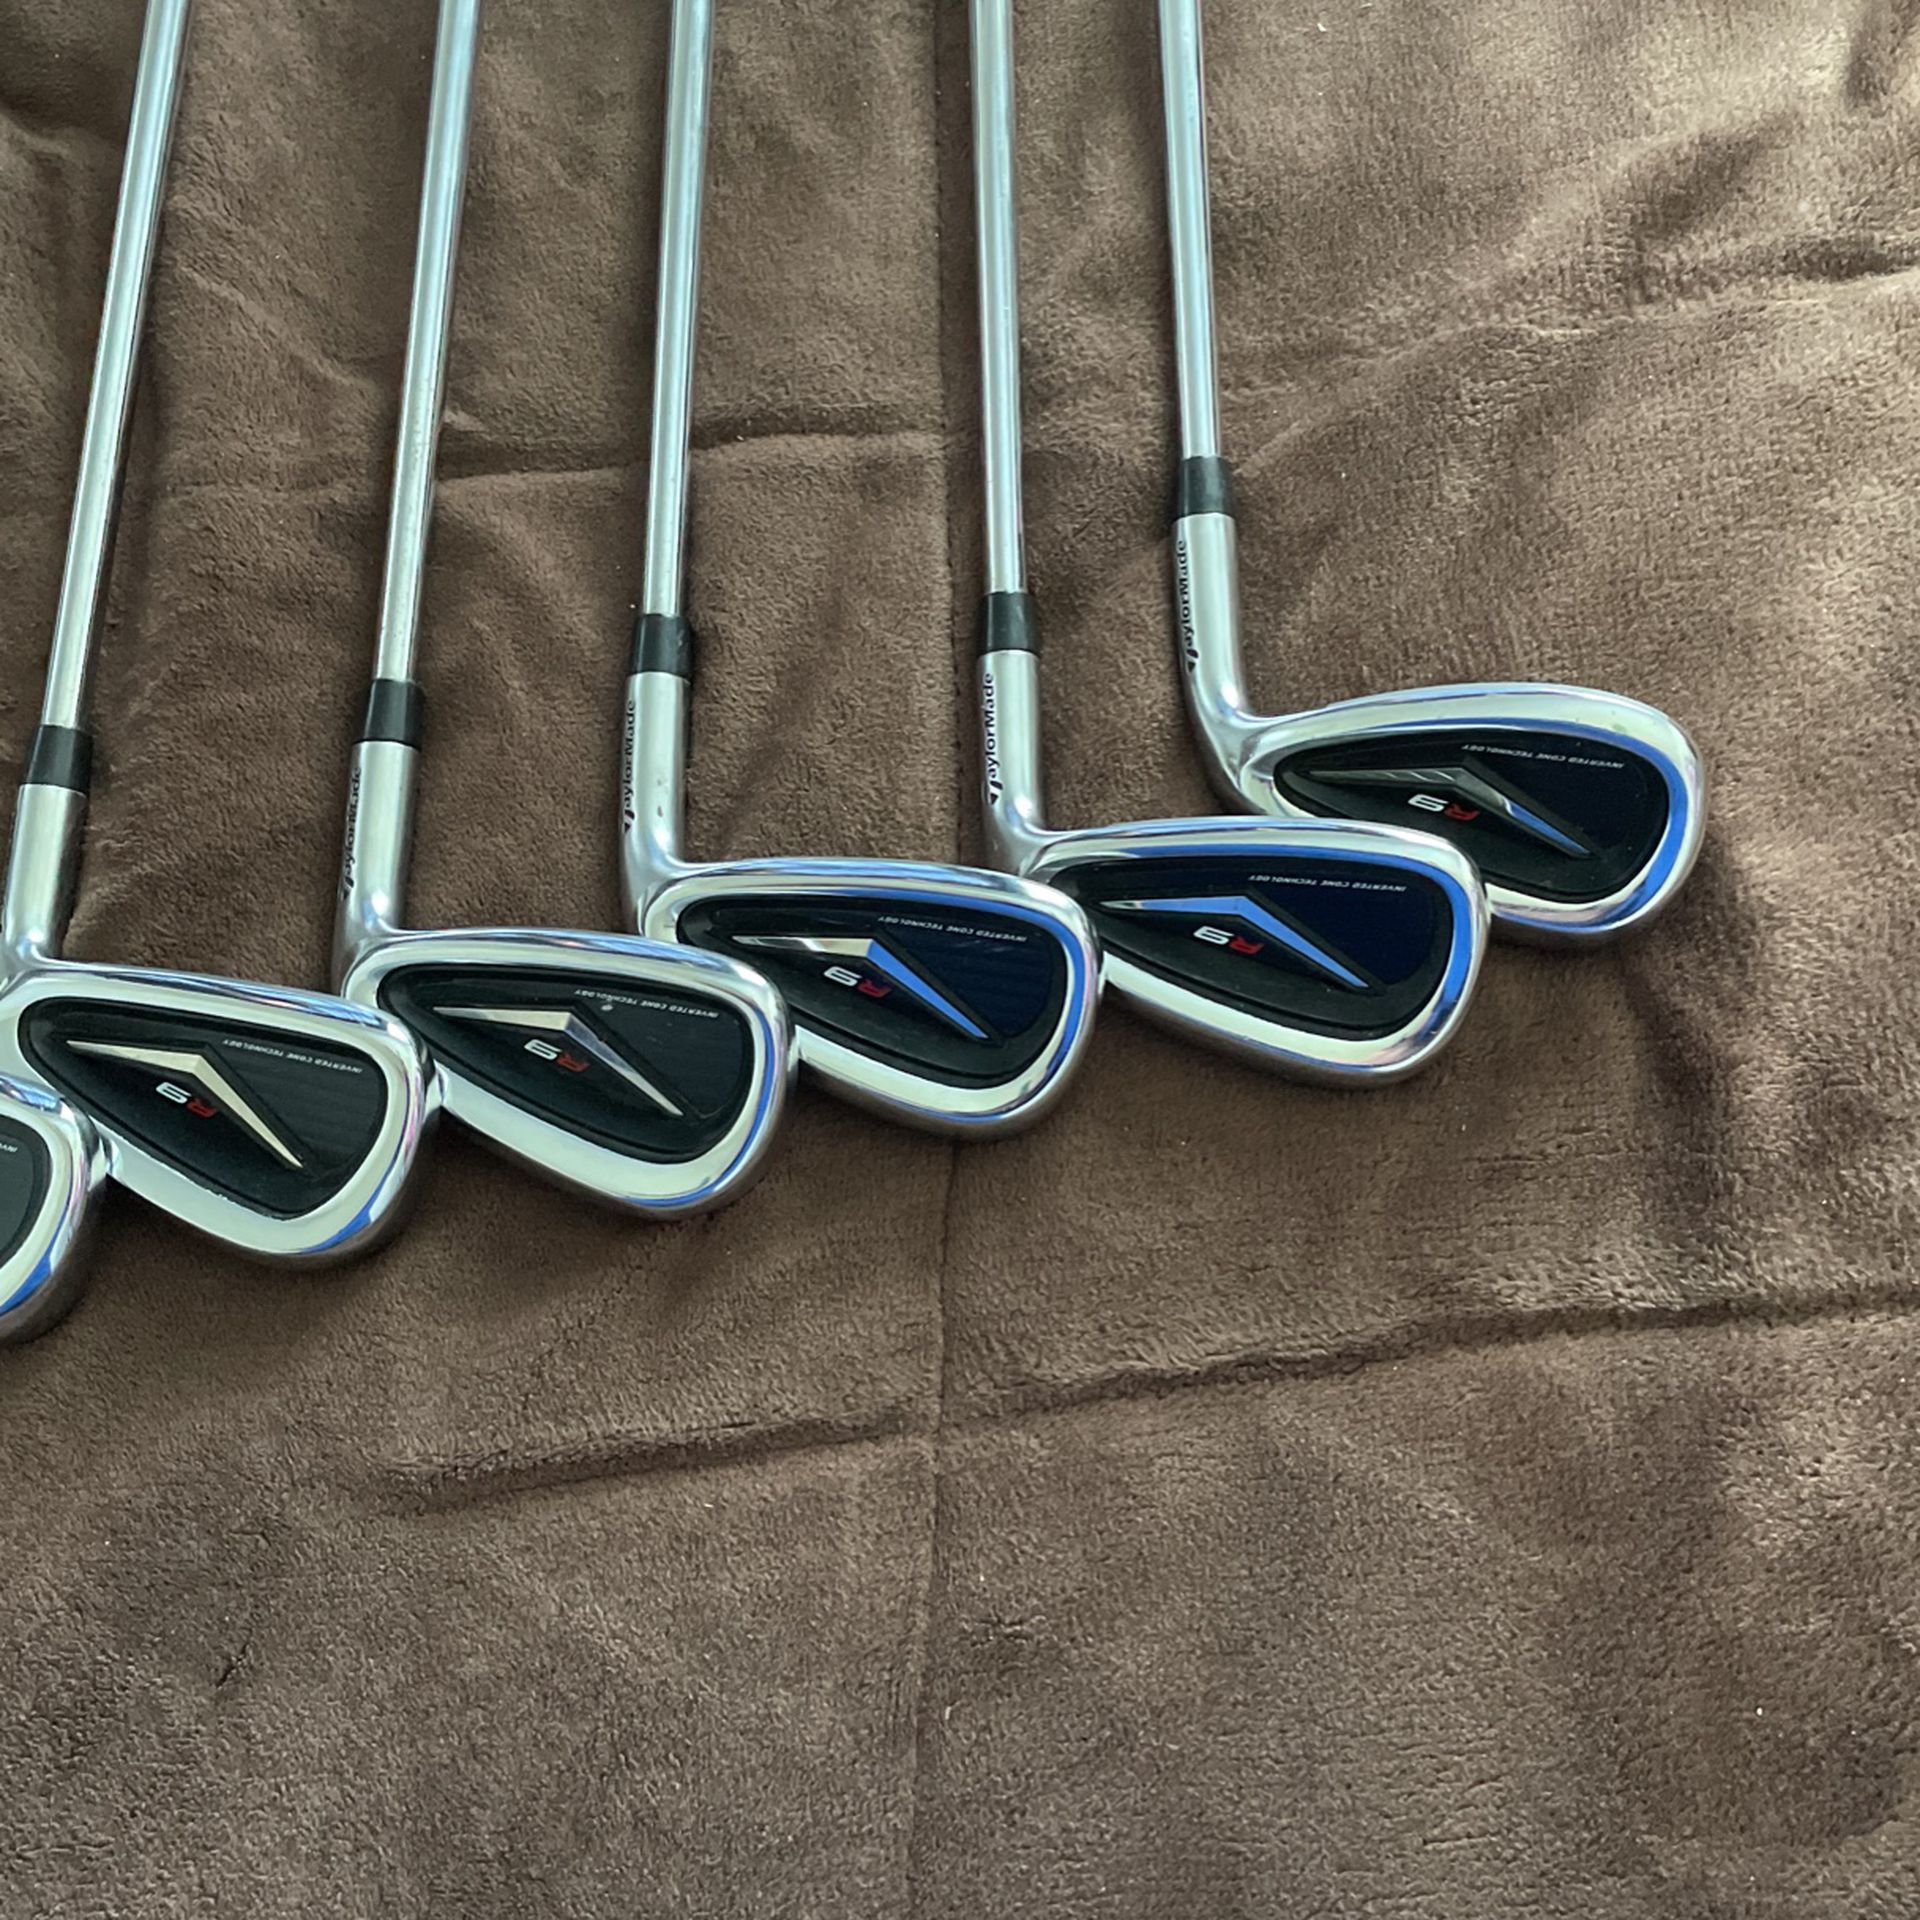 Taylormade R9 irons 4-PW, SW